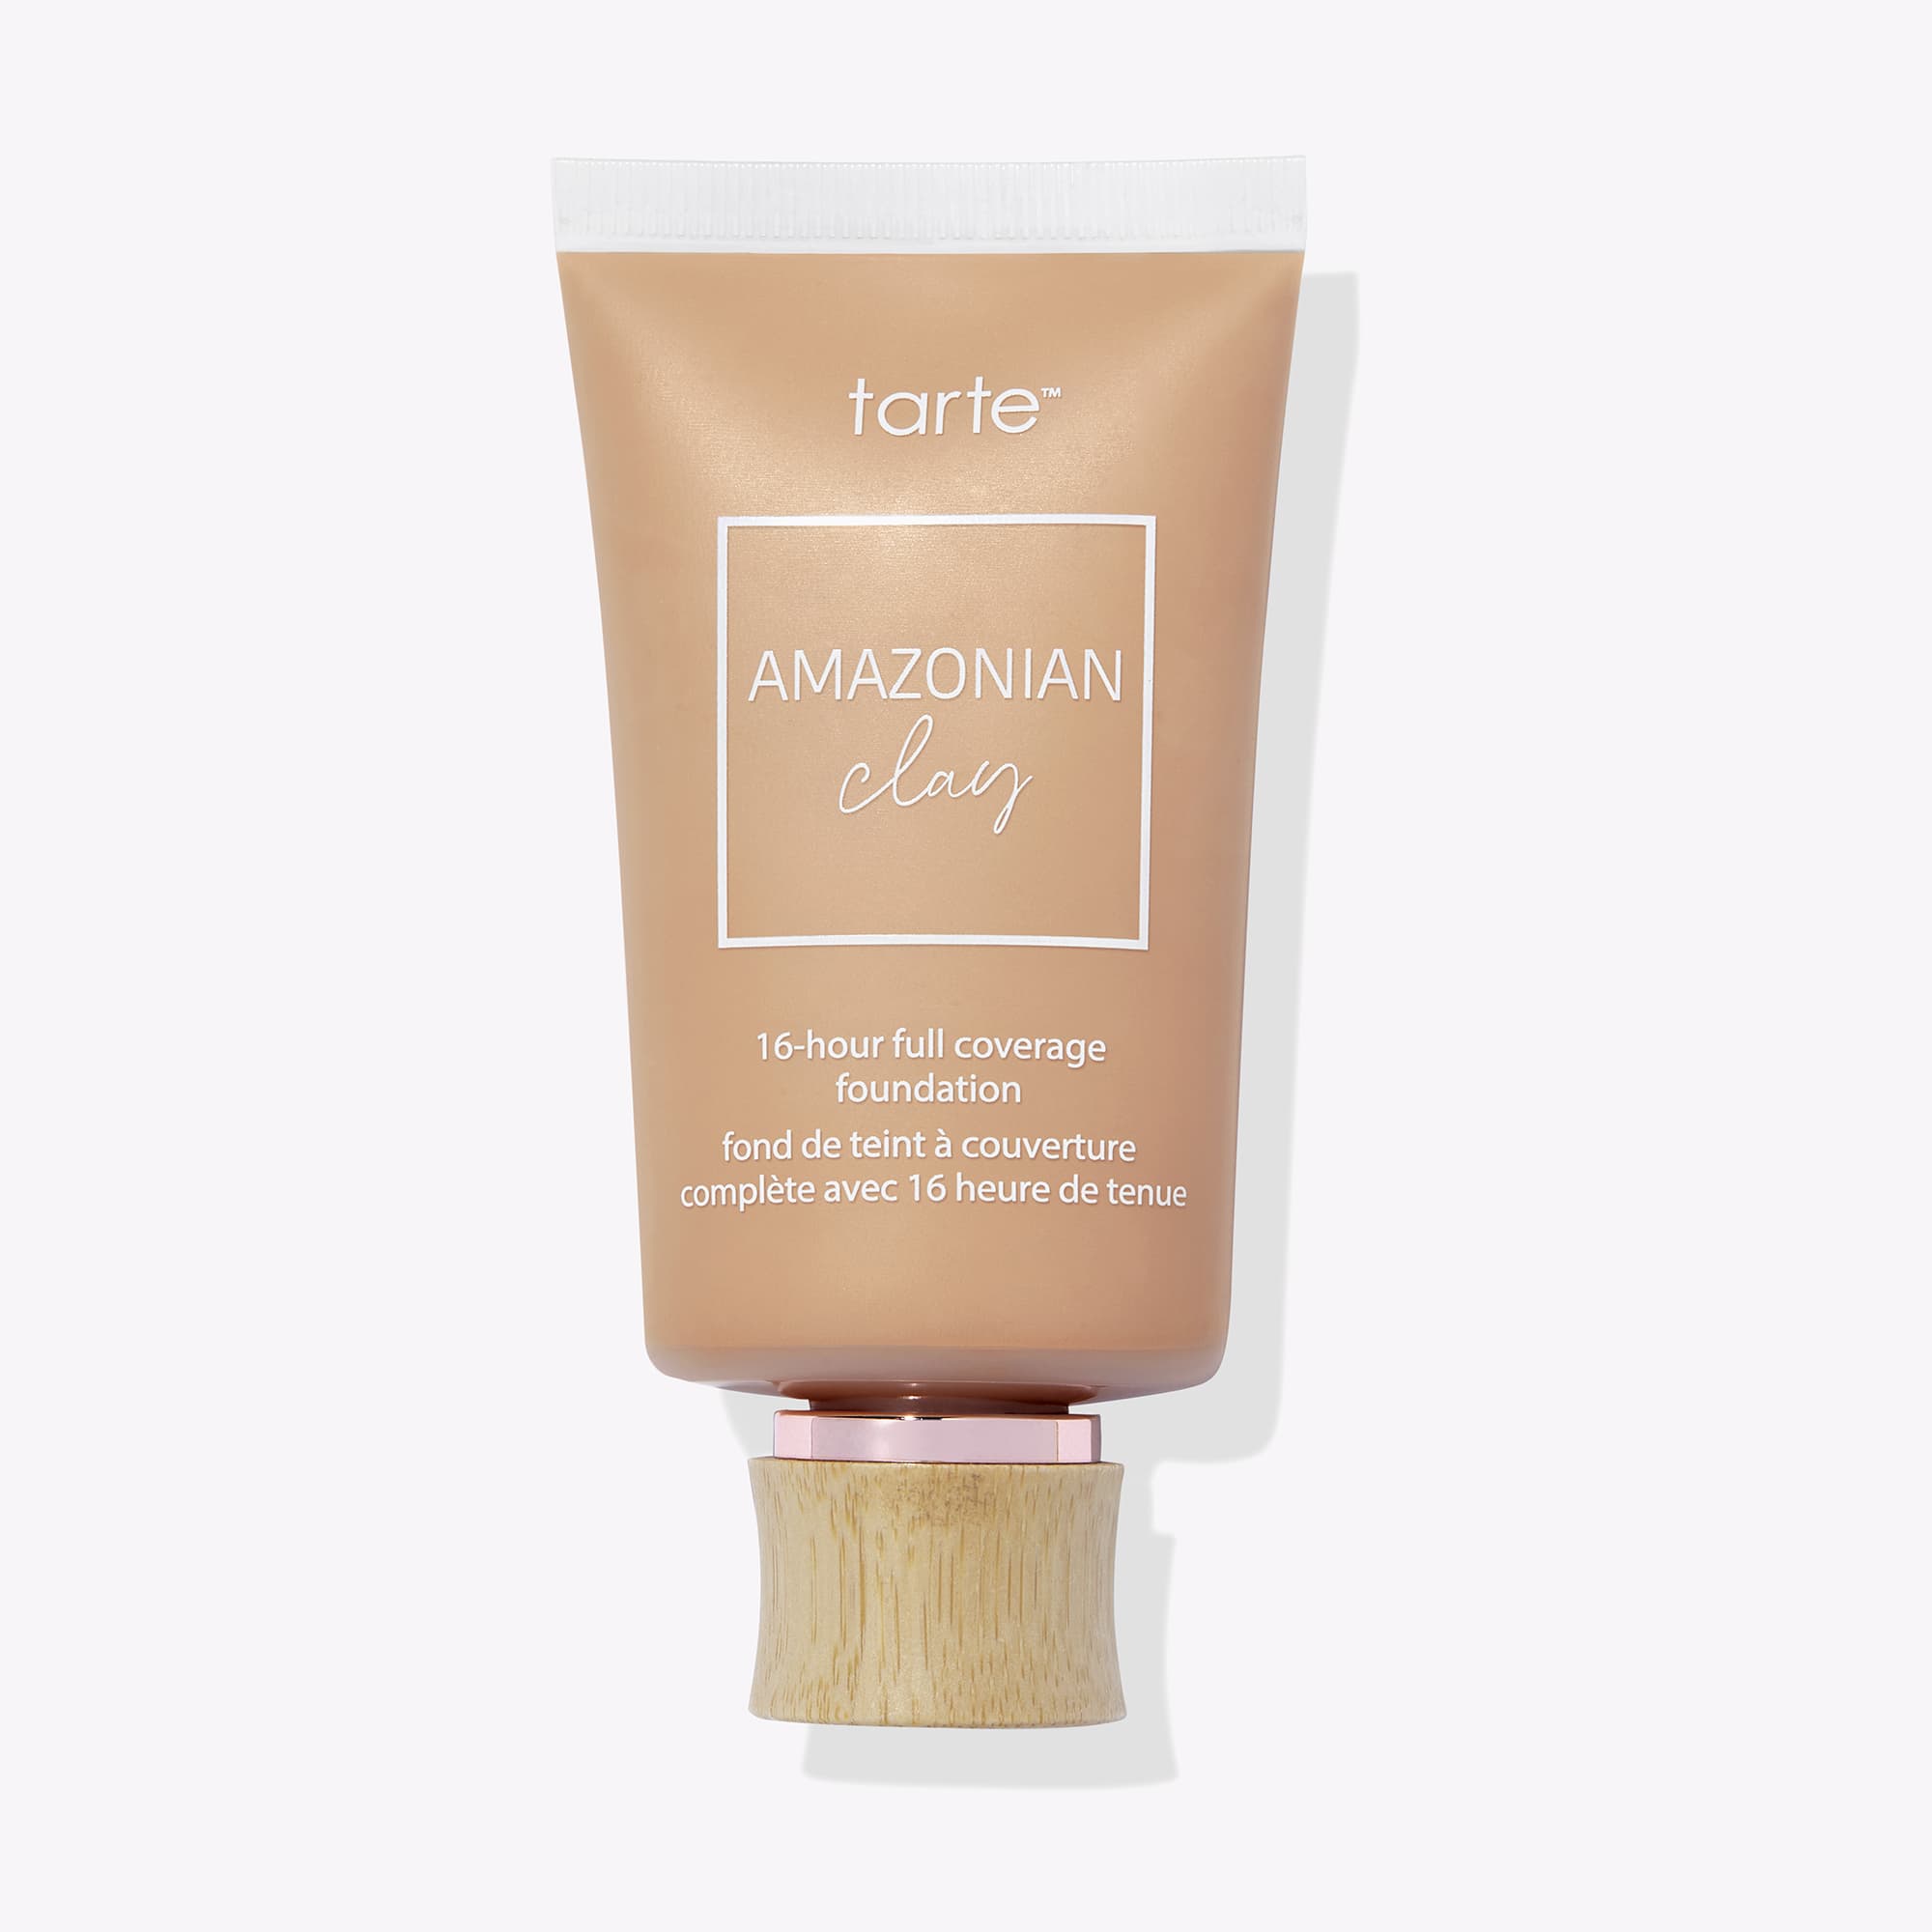 Amazonian clay 16-hour full coverage foundation